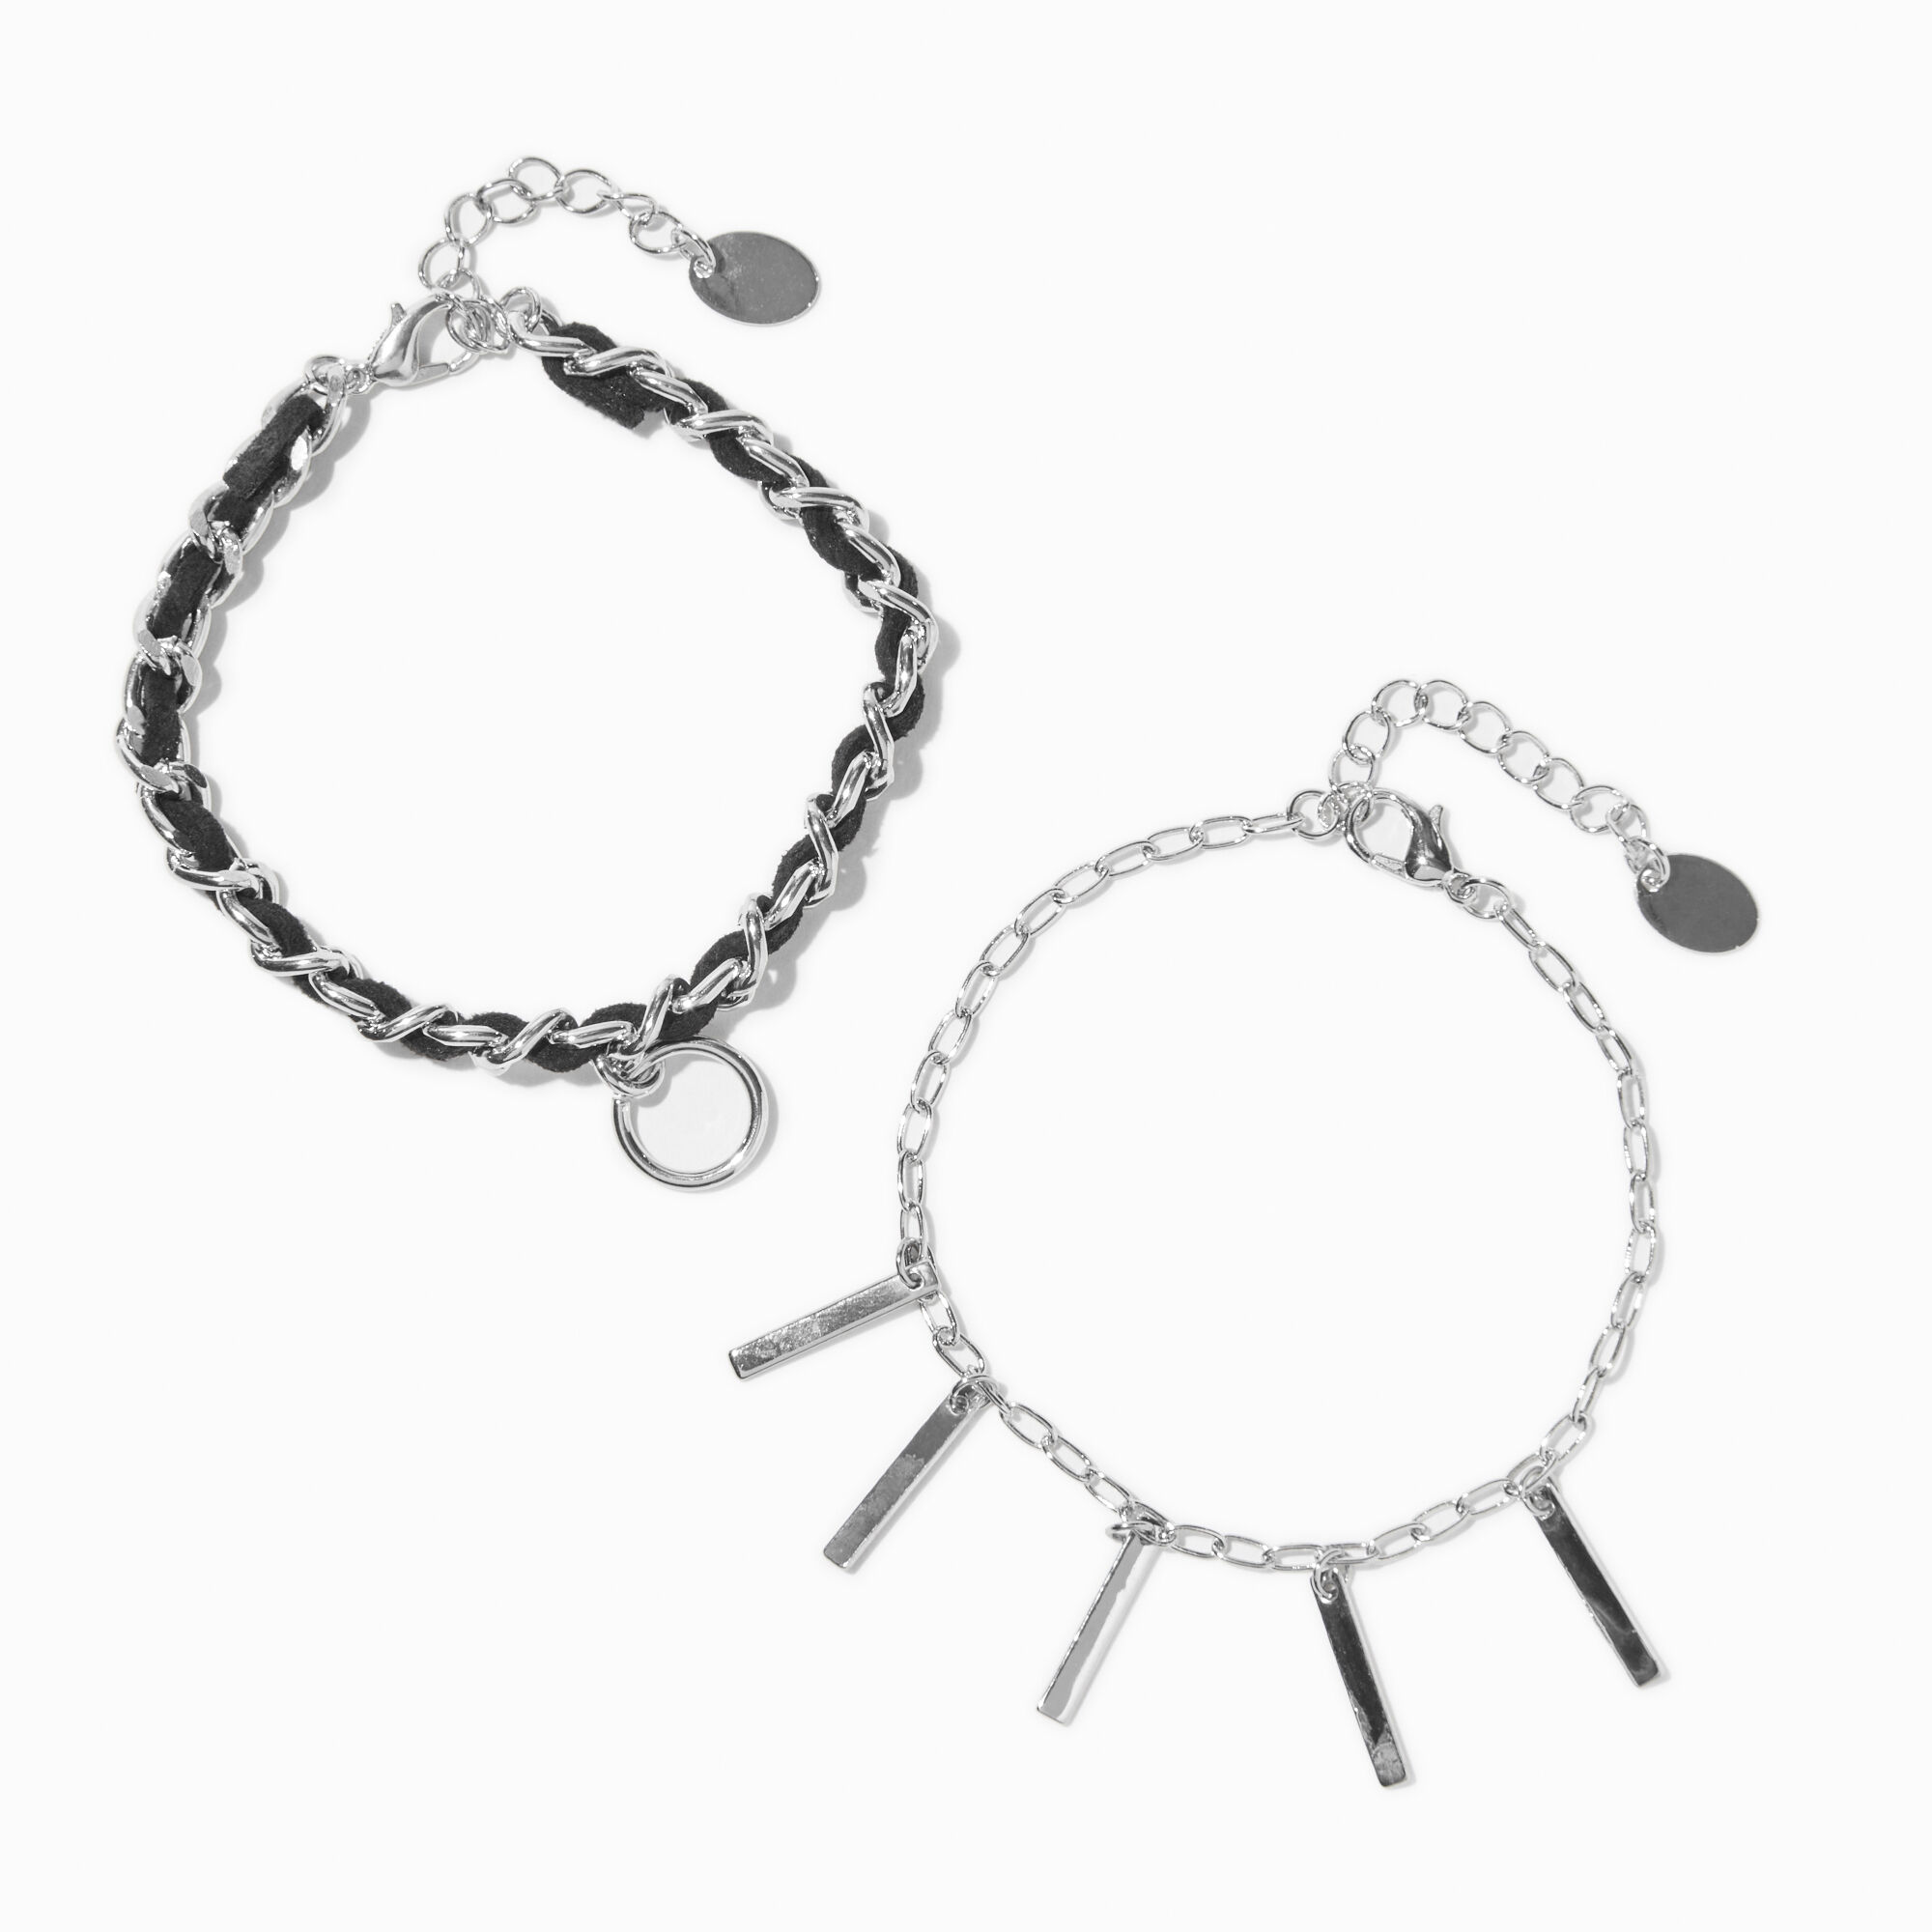 View Claires SilverTone Bar Charm And CordWrapped Bracelet Set 2 Pack Black information